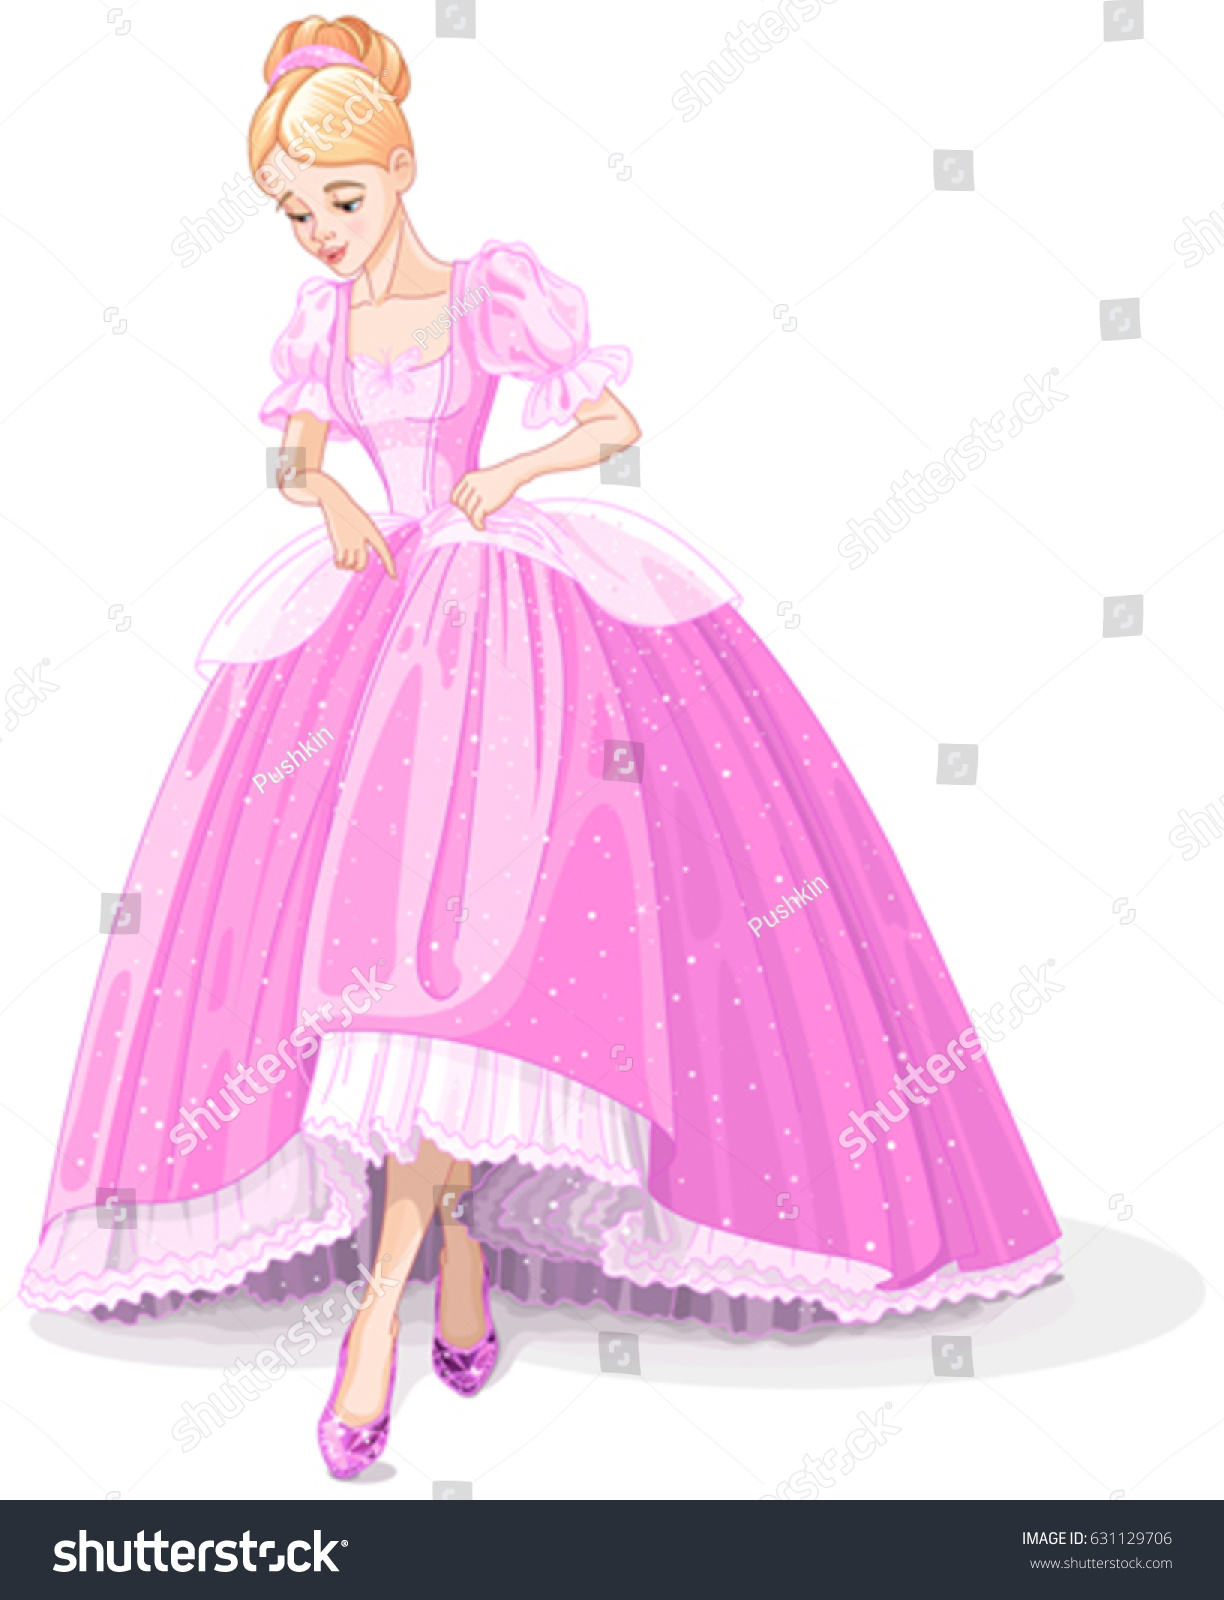 Beautiful Cinderella dressed ball gown wallpaper for walls. 